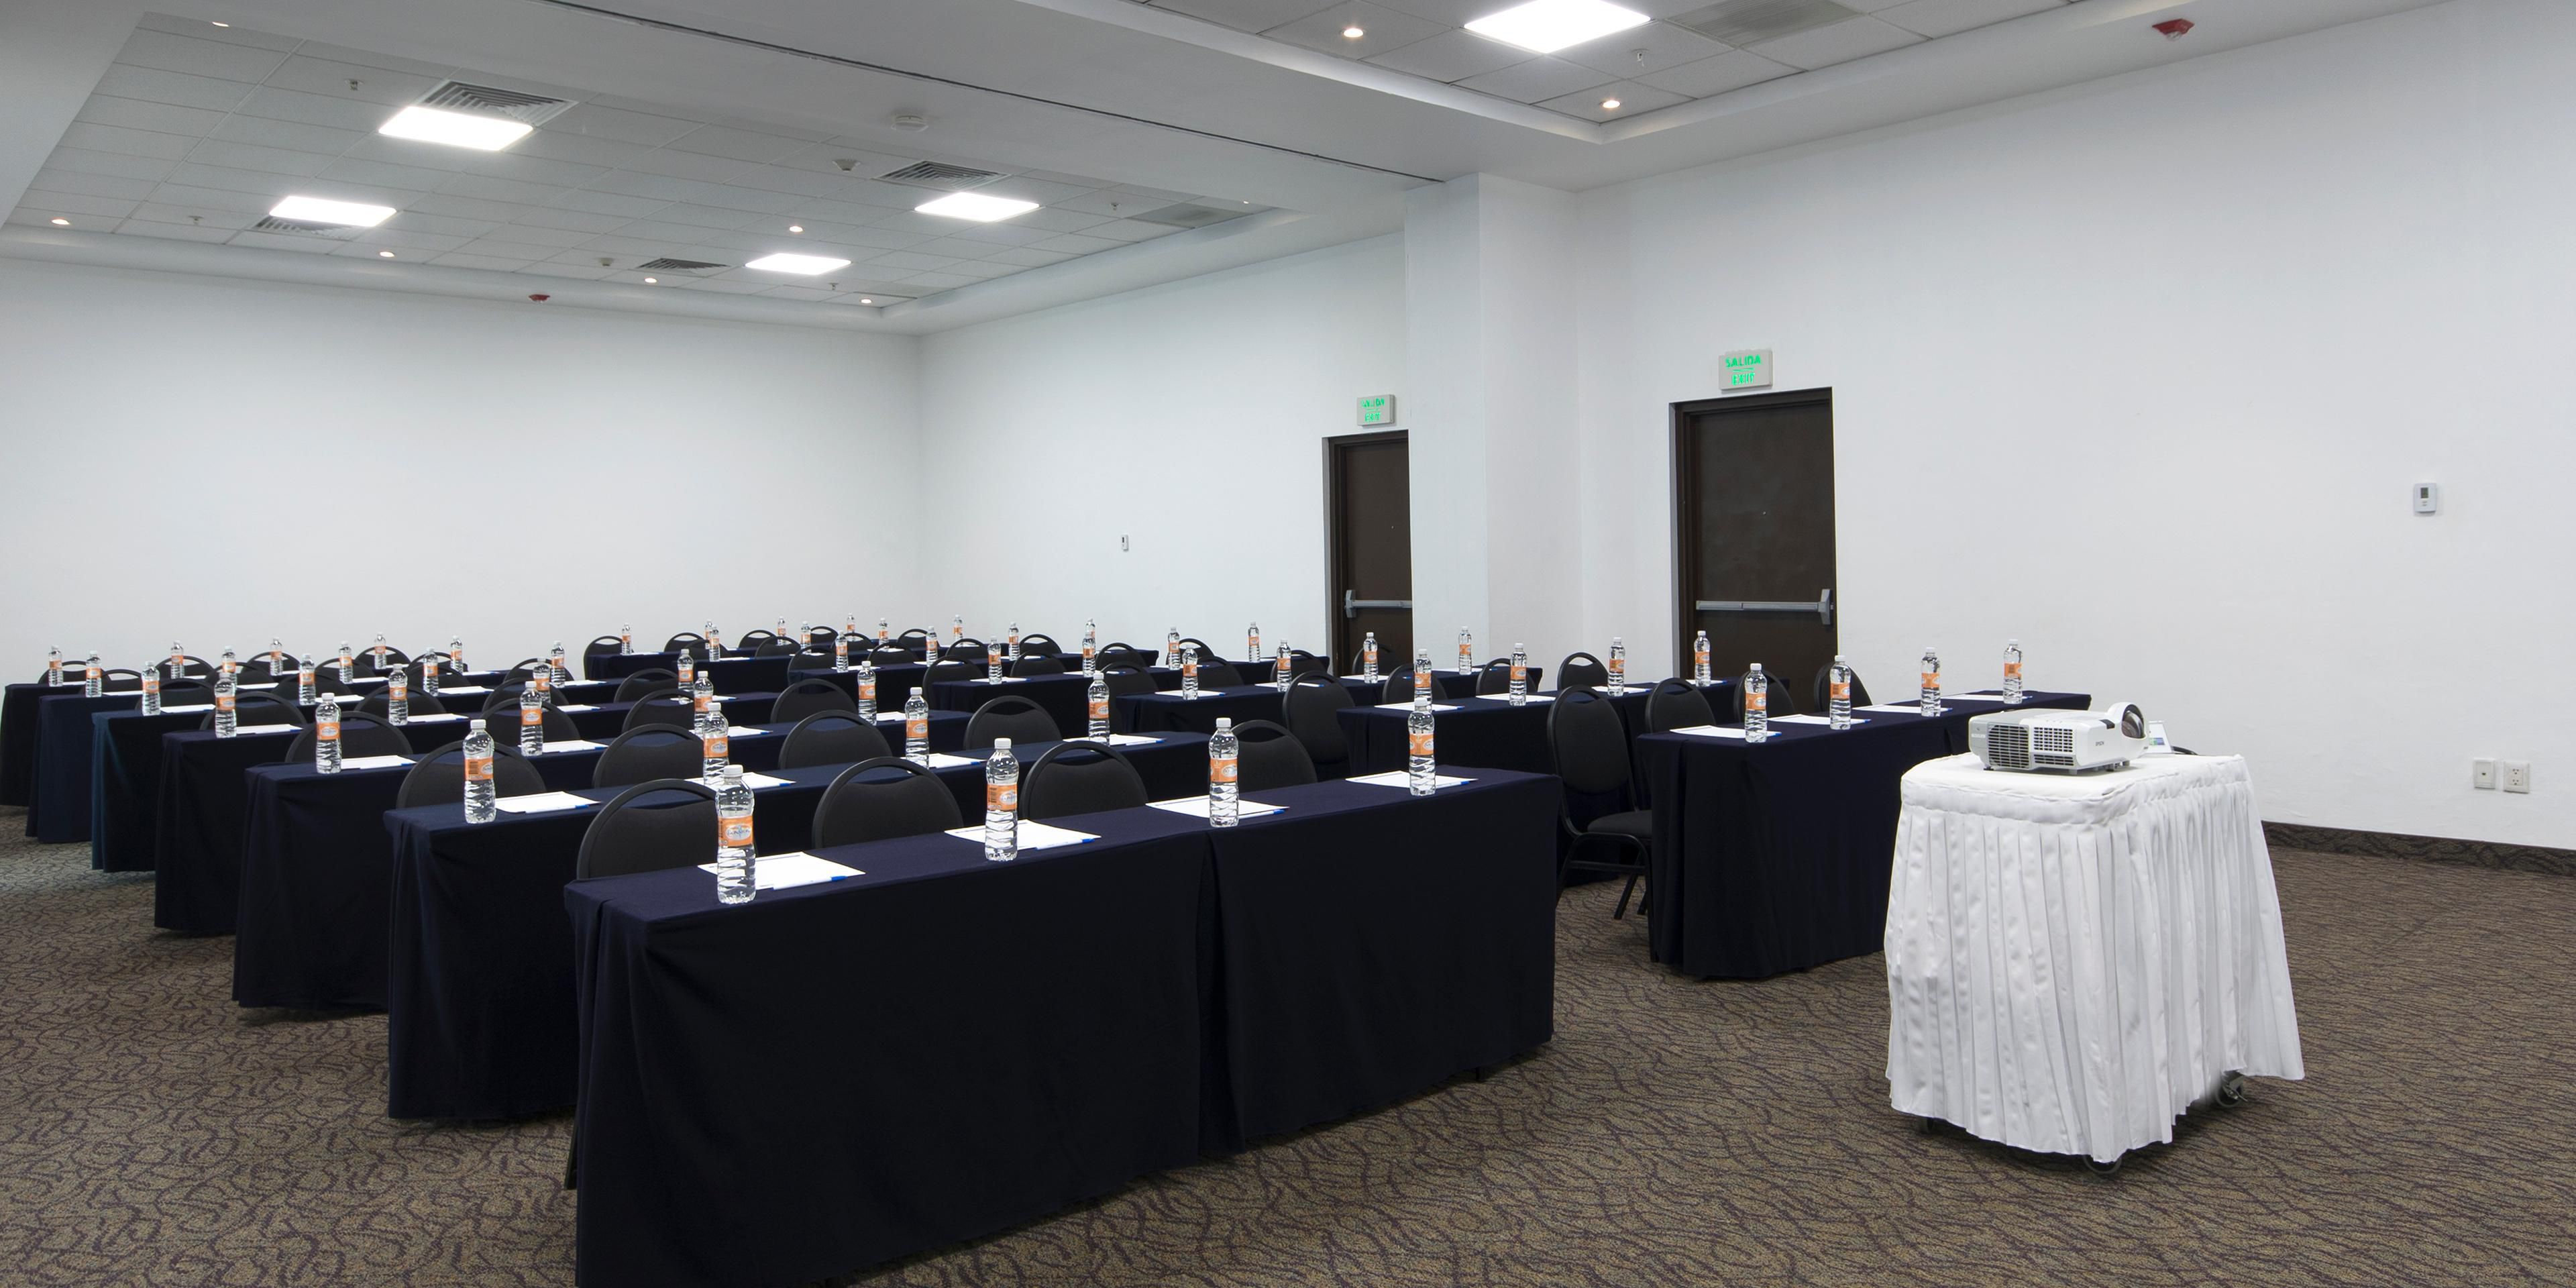 Four meeting rooms with maximum capacity of 120 people are available for any conference or business meeting. Each room has A/V equipment and can be arranged in several ways depending on your event needs.